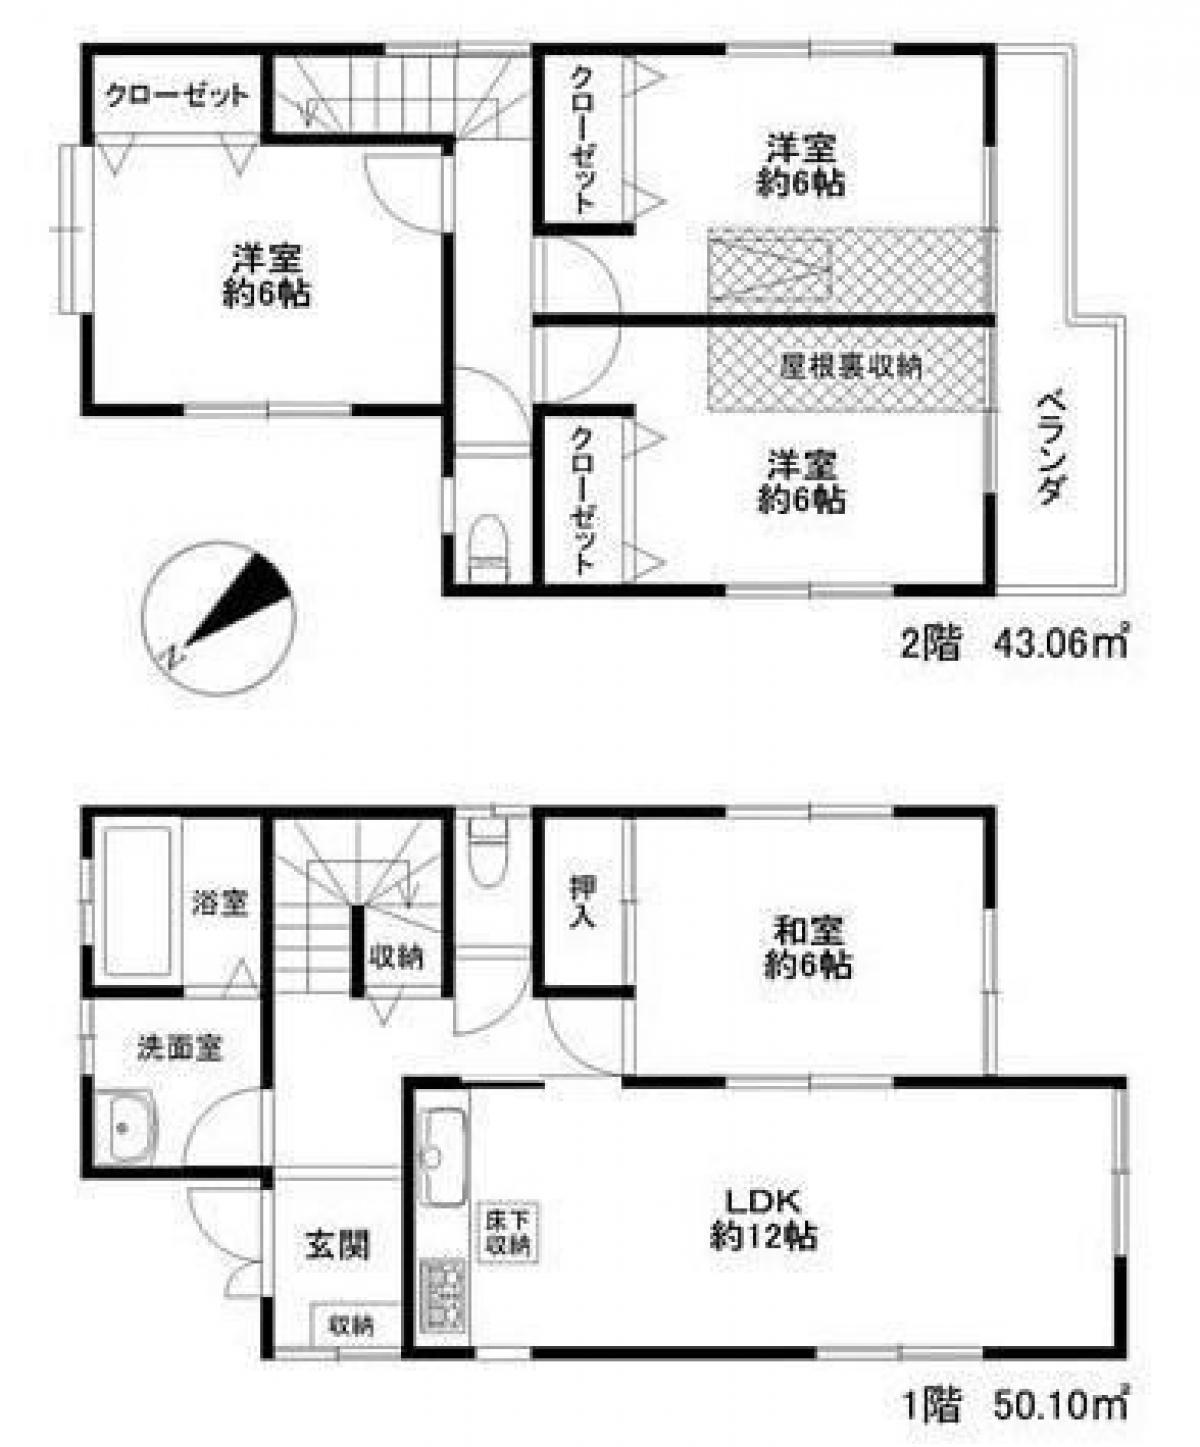 Picture of Home For Sale in Machida Shi, Tokyo, Japan